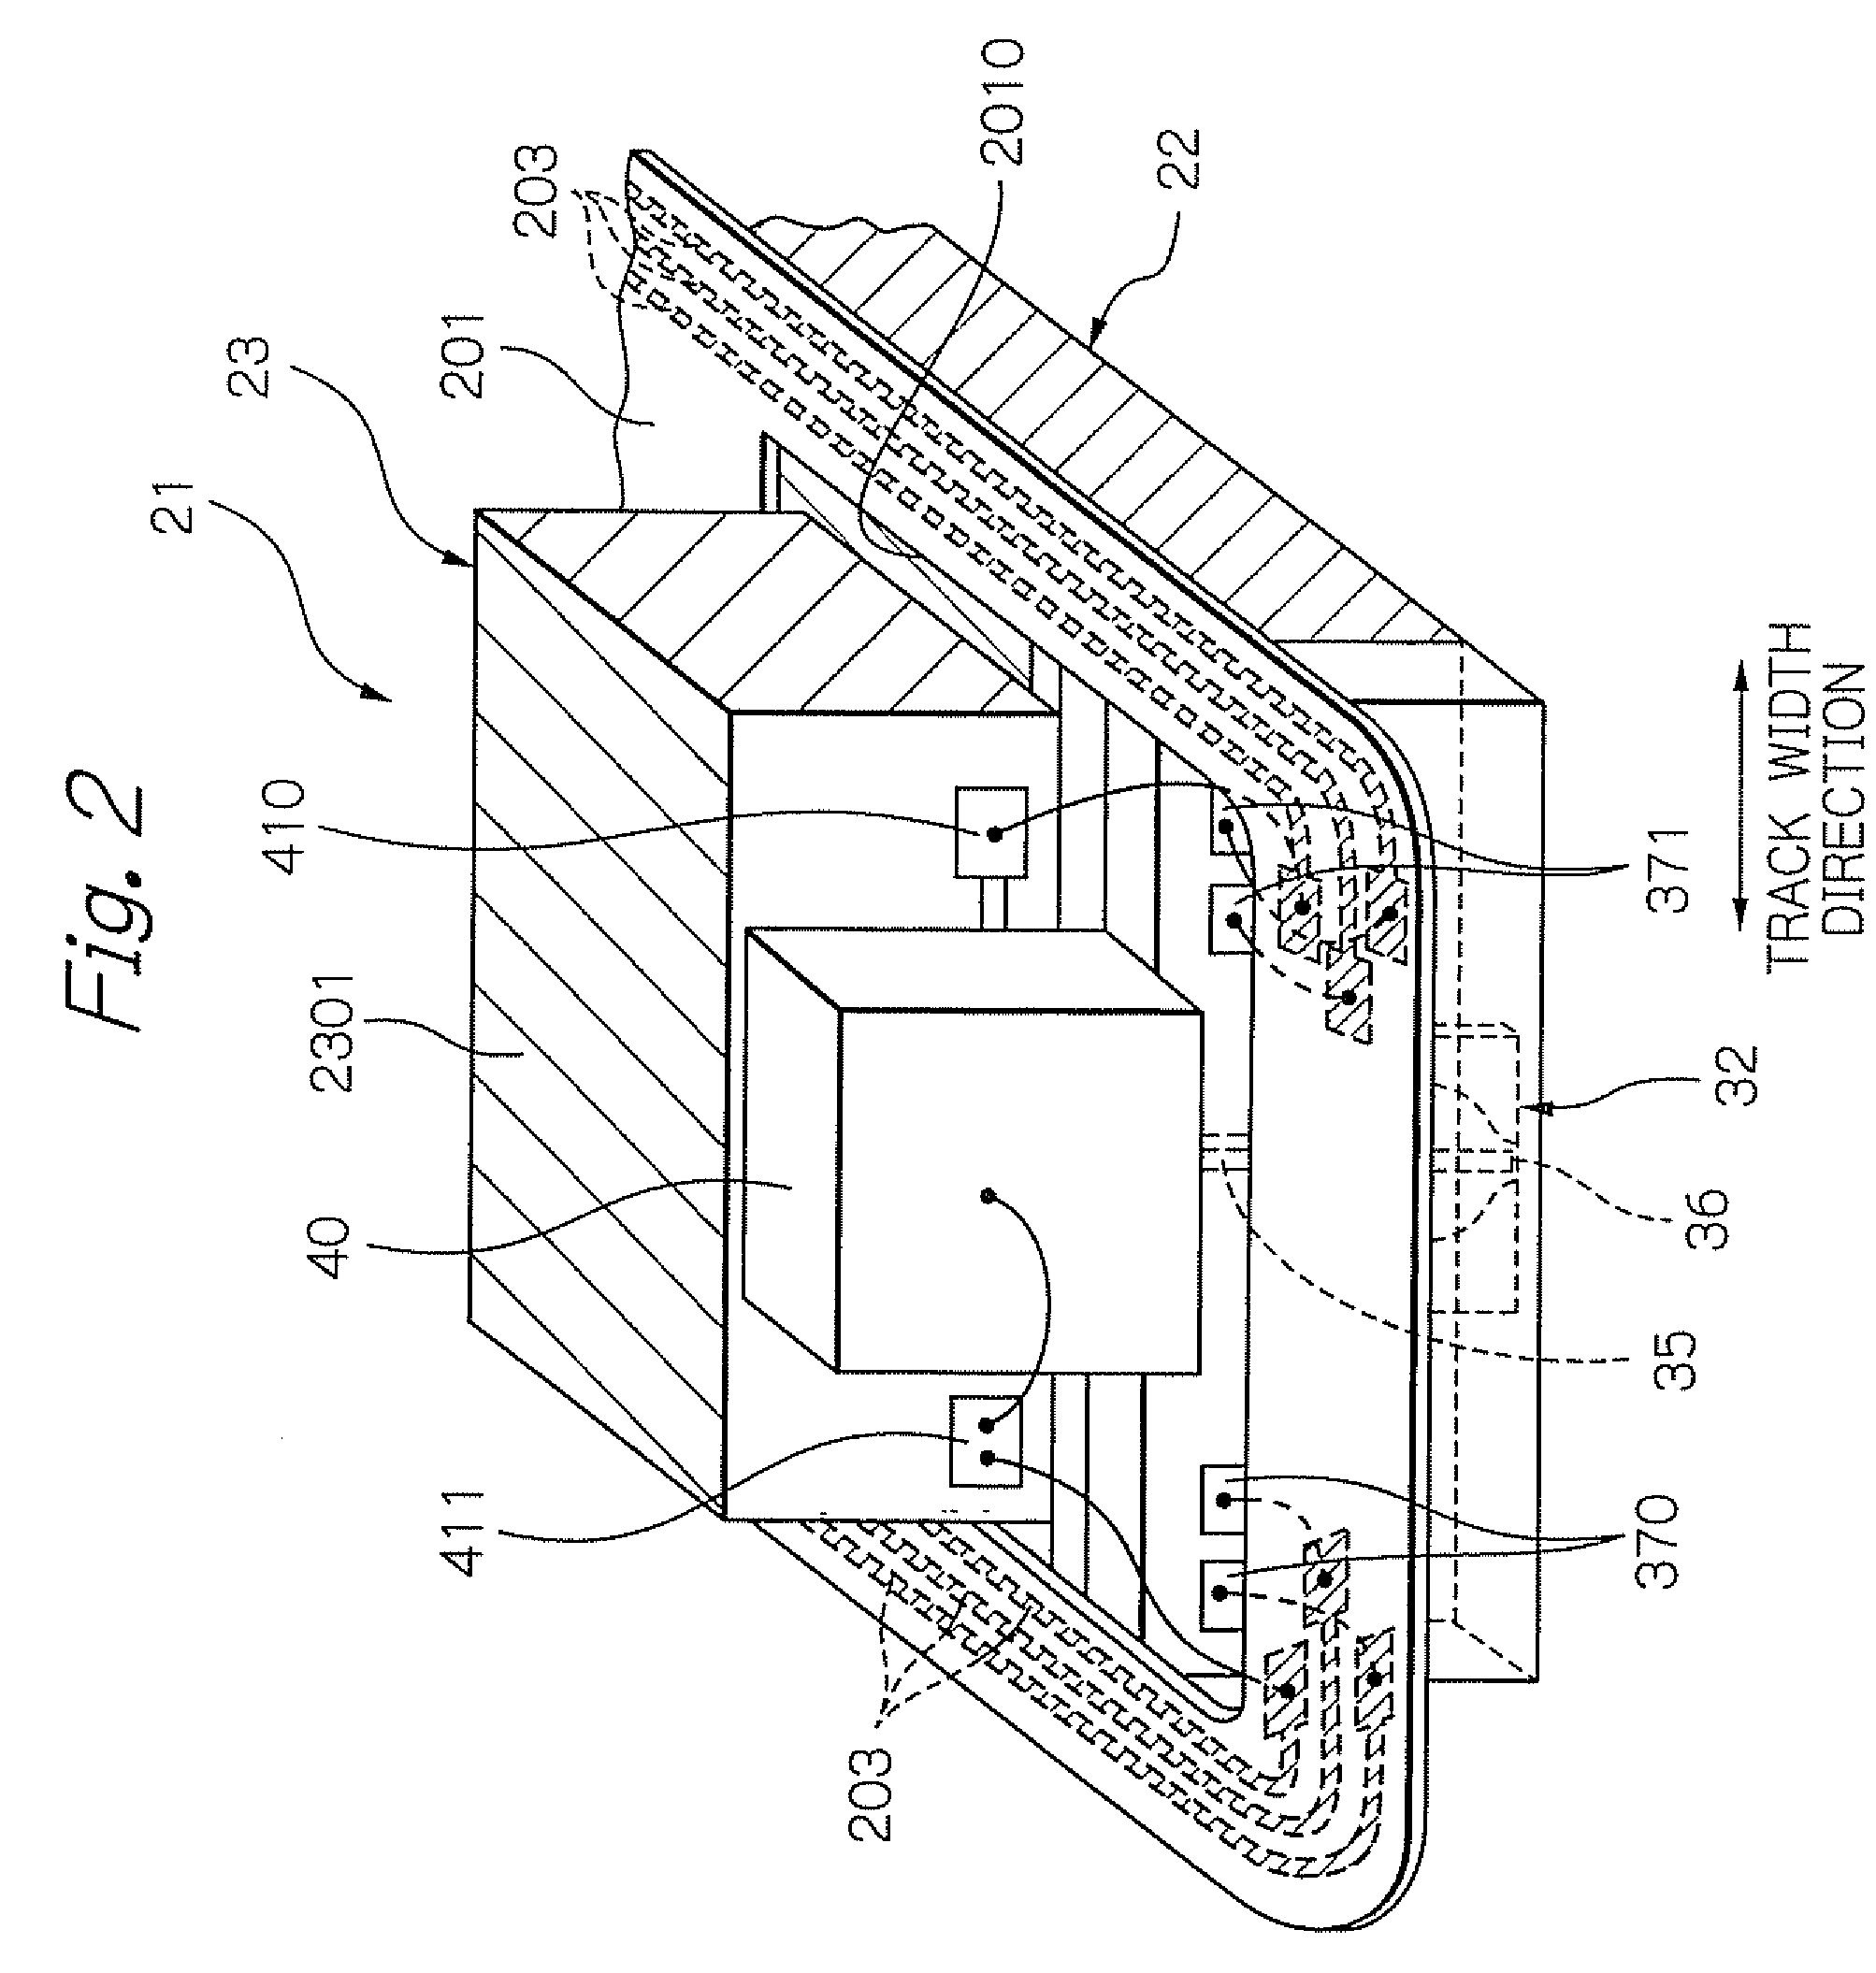 Heat-assisted magnetic head constituted of slider and light source unit, and manufacturing method of the head